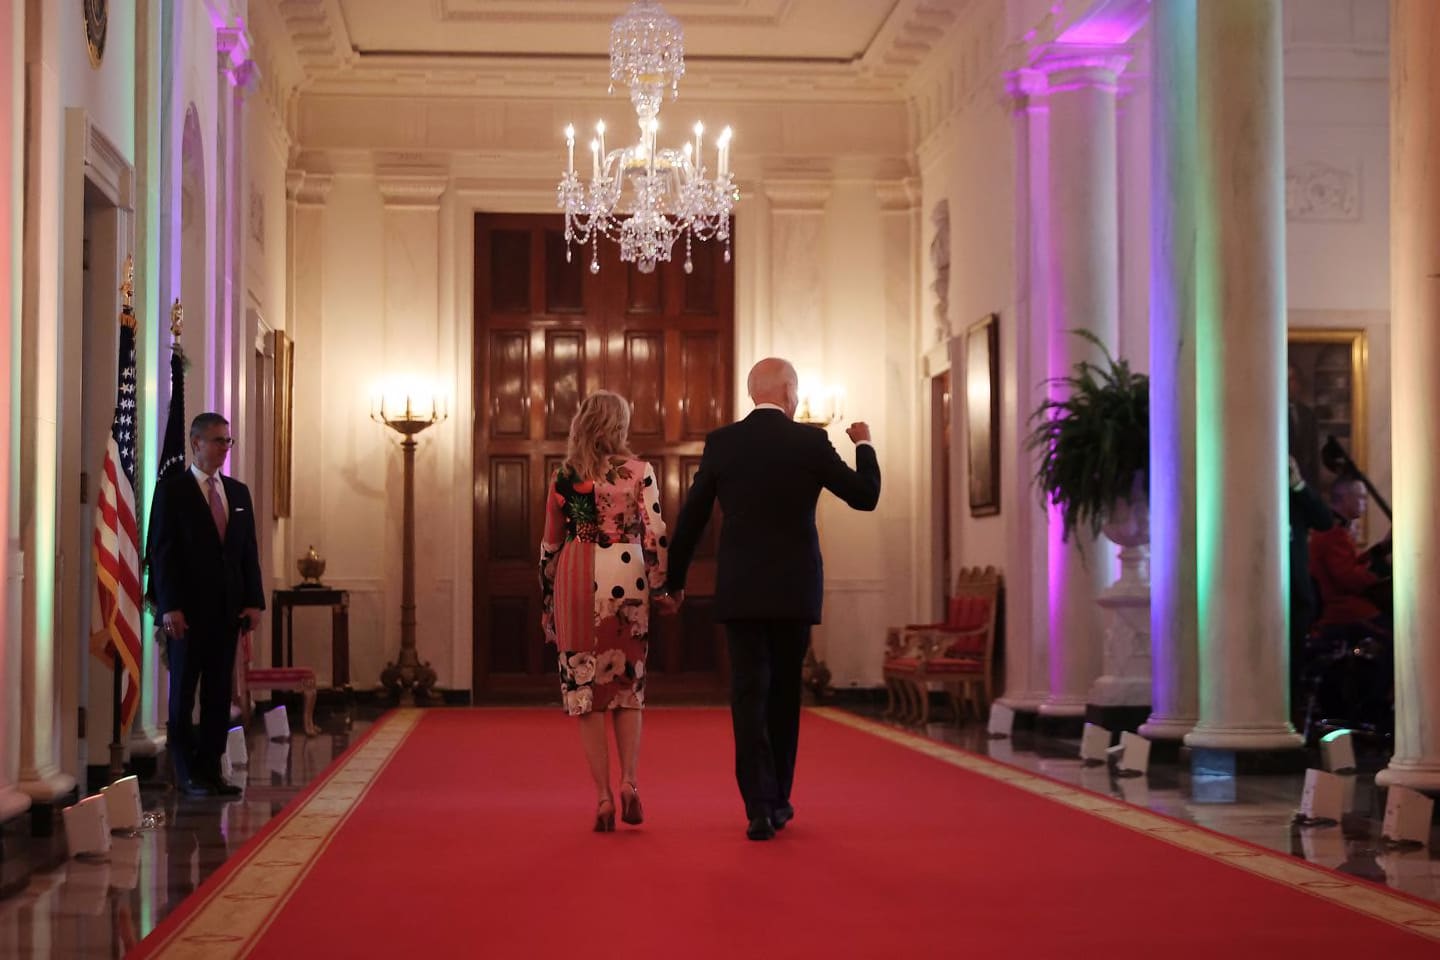 President Biden and first lady Jill Biden walked through the Cross Hall lit with rainbow colors following an event commemorating LGBTQ Pride Month in the East Room of the White House on Friday.